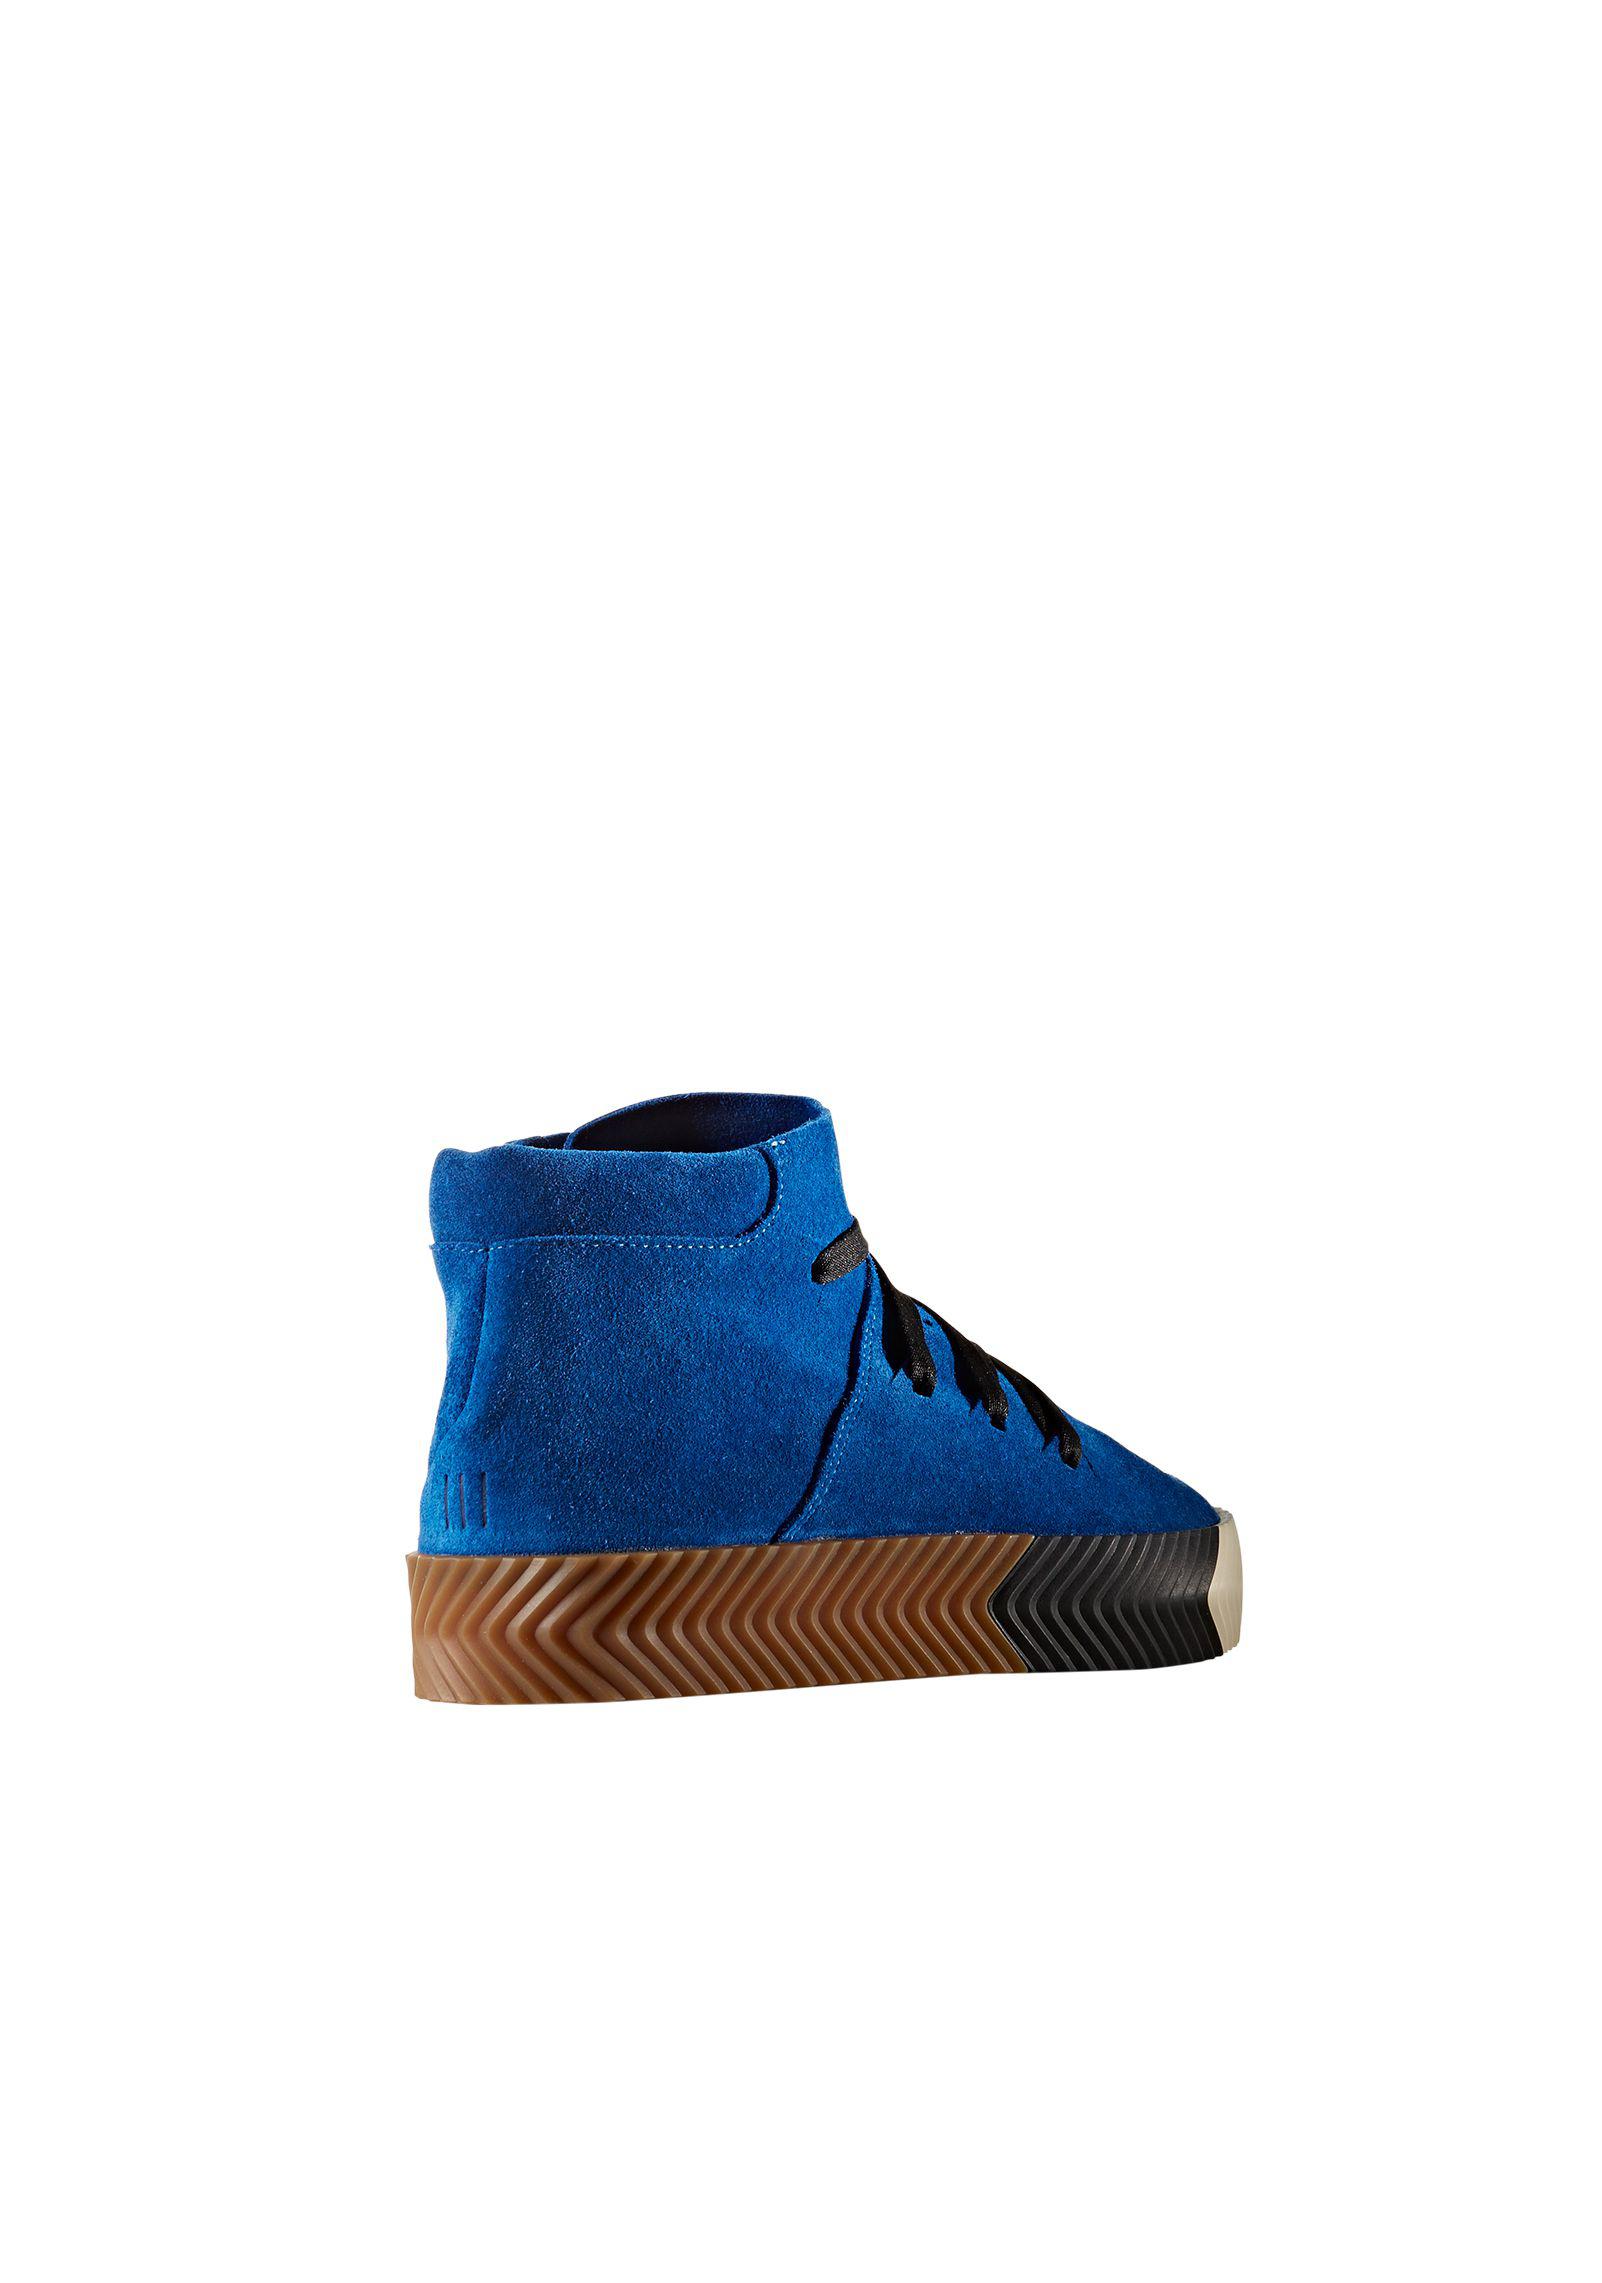 Alexander Wang Suede Adidas Originals By Aw Skate Shoes in Blue for Men |  Lyst